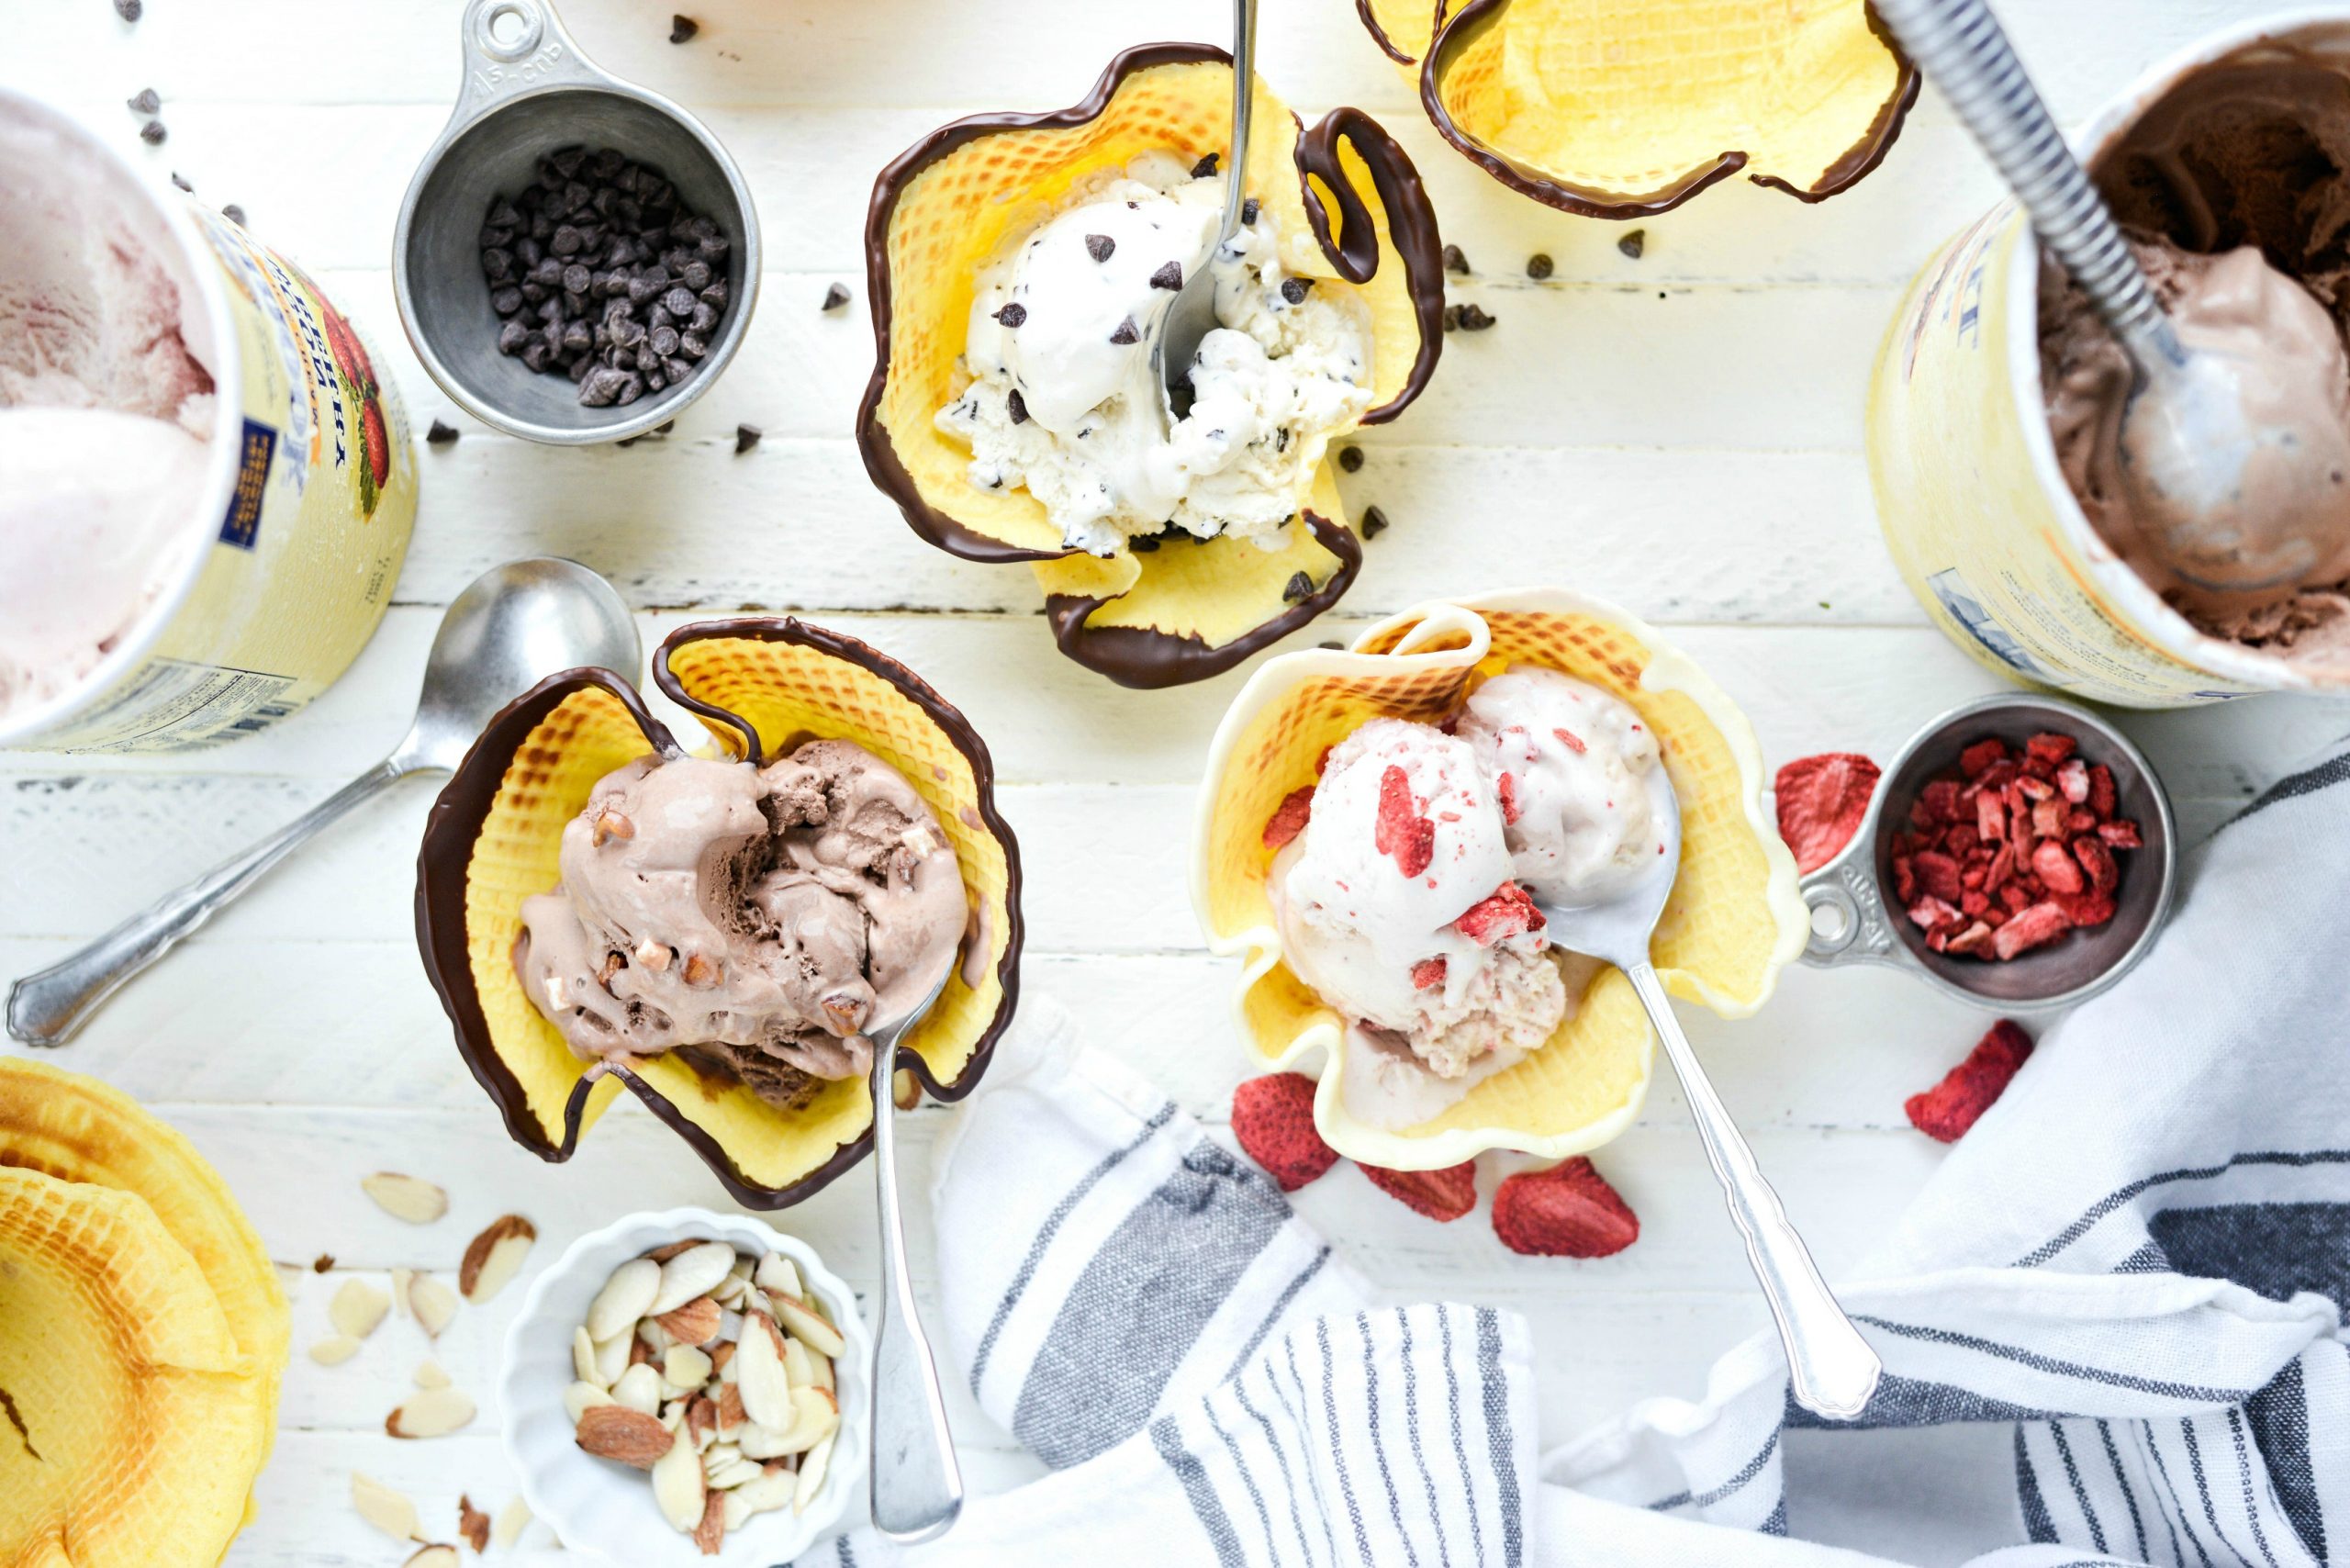 https://www.simplyscratch.com/wp-content/uploads/2018/07/Homemade-Ice-Cream-Waffle-Bowls-l-SimplyScratch.com-025-scaled.jpg